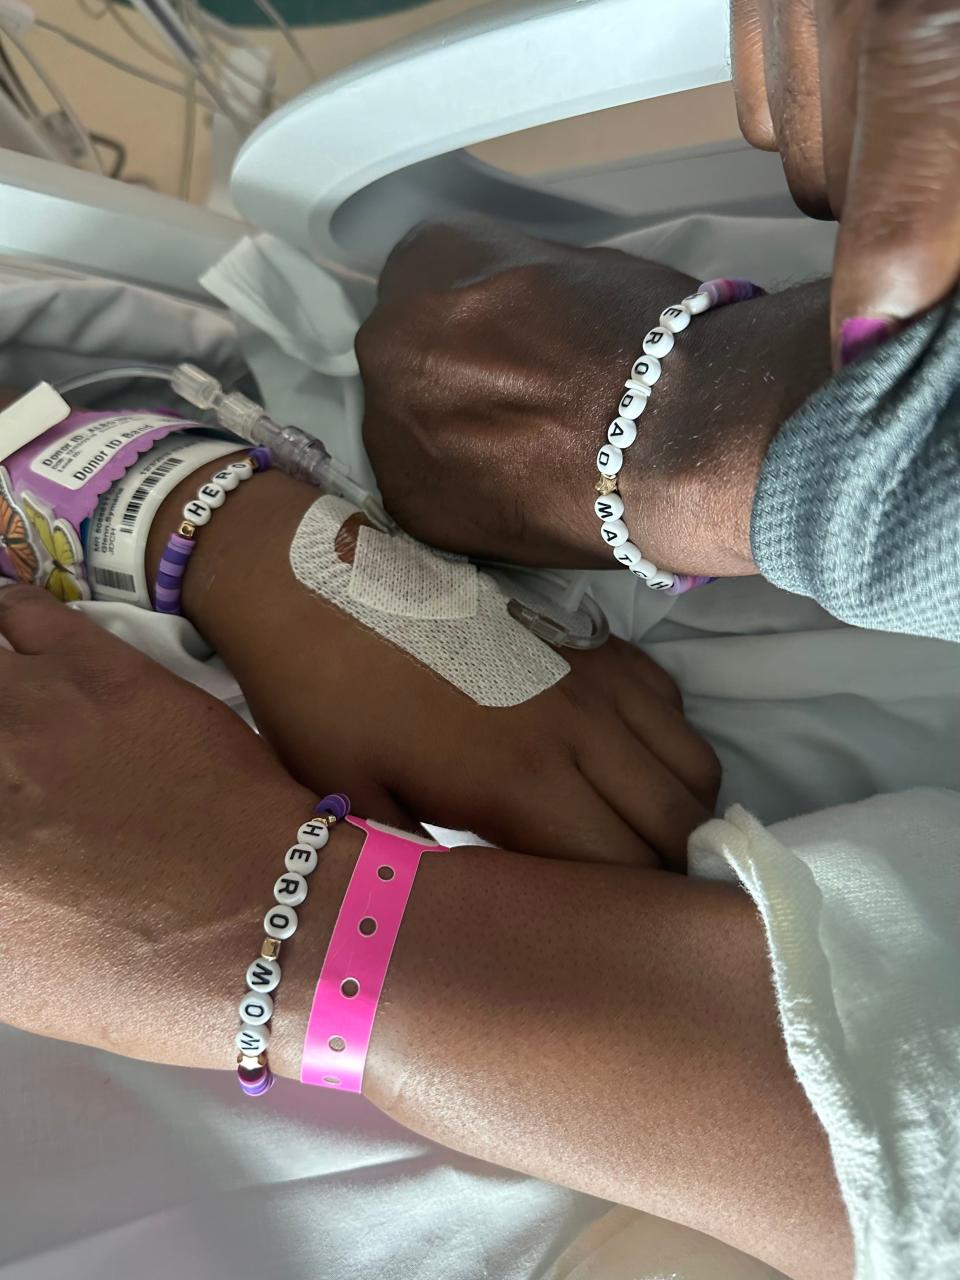 Symaria Glenn's 'hero' bracelet. The 13-year-old suffered a brain bleed in late January. She donated organs to multiple people, including her own father, Shawn Glenn.